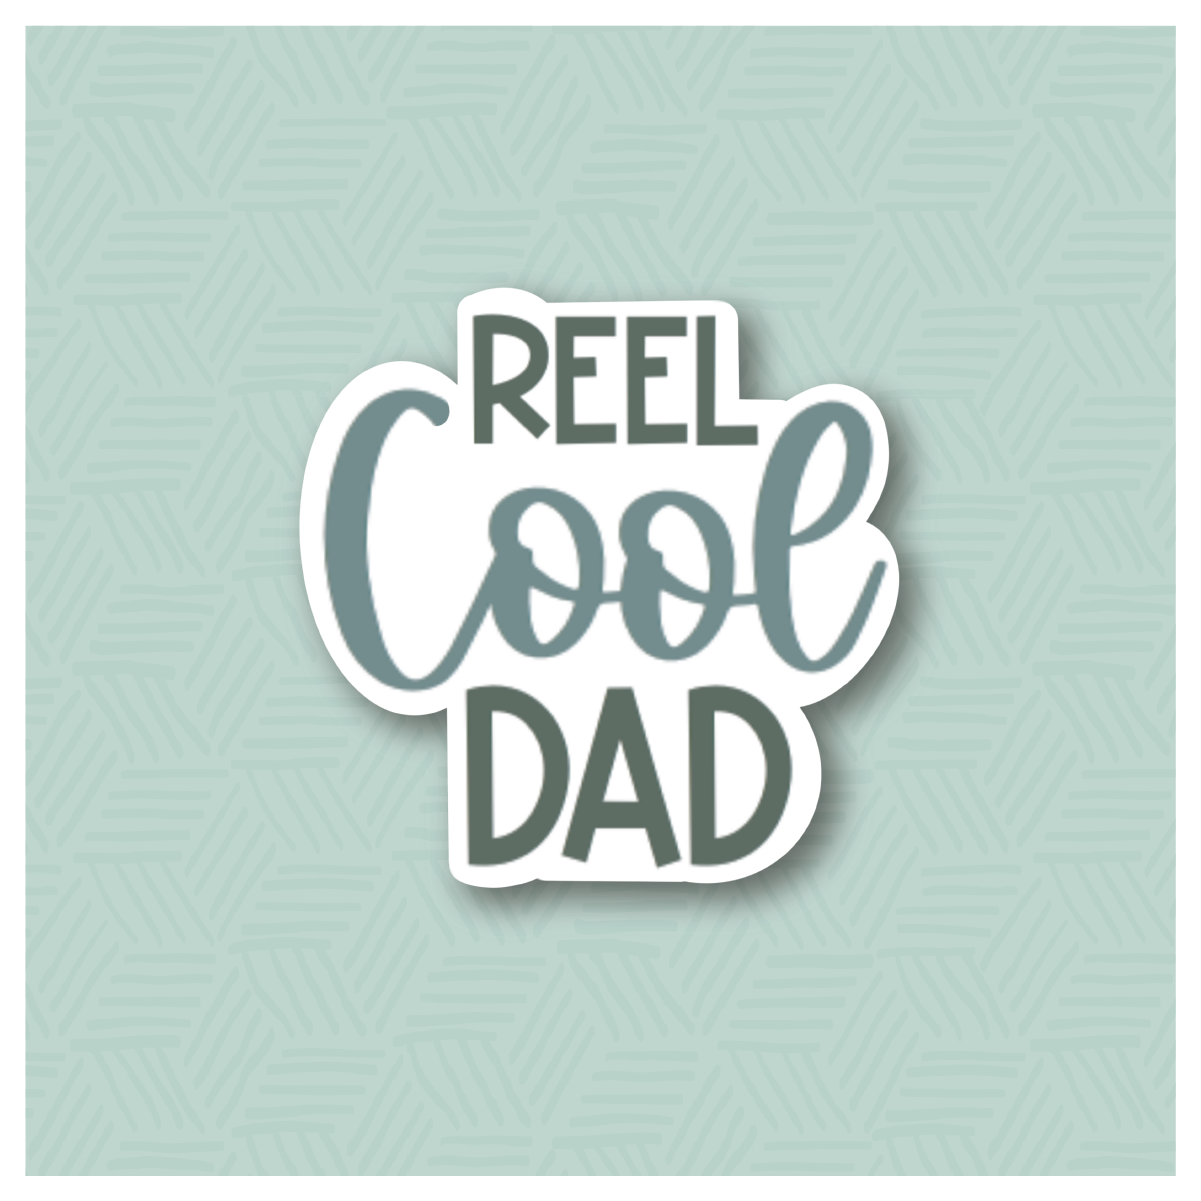 Reel Cool Dad Hand Lettered Cookie Cutter